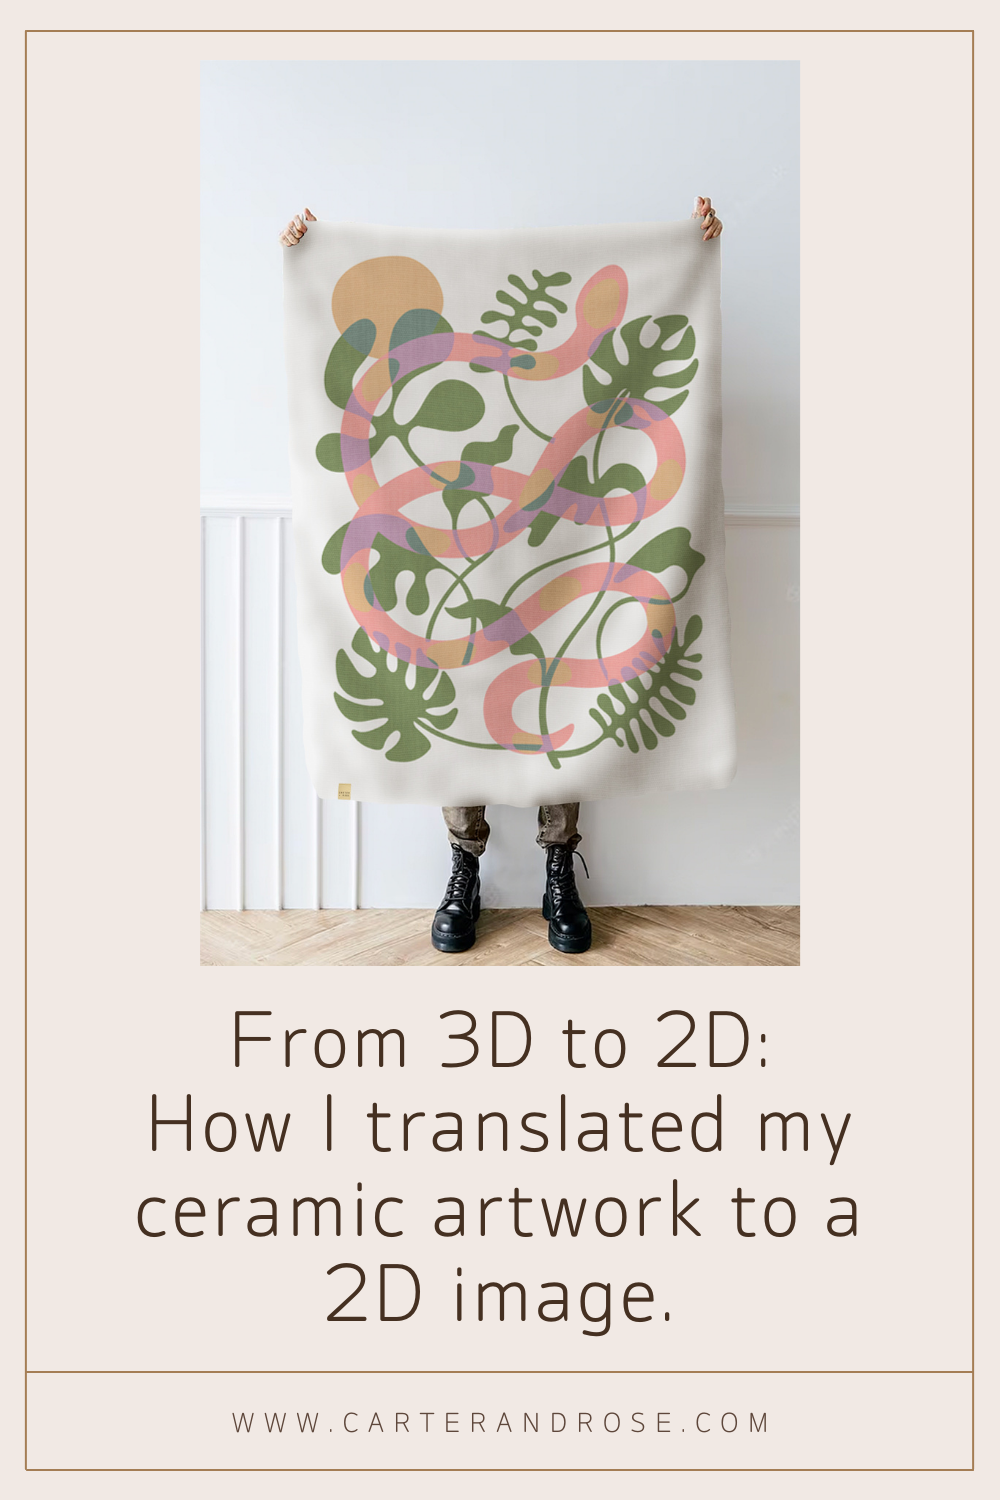 From 3D to 2D: How I translated my ceramic art to a 2D image.